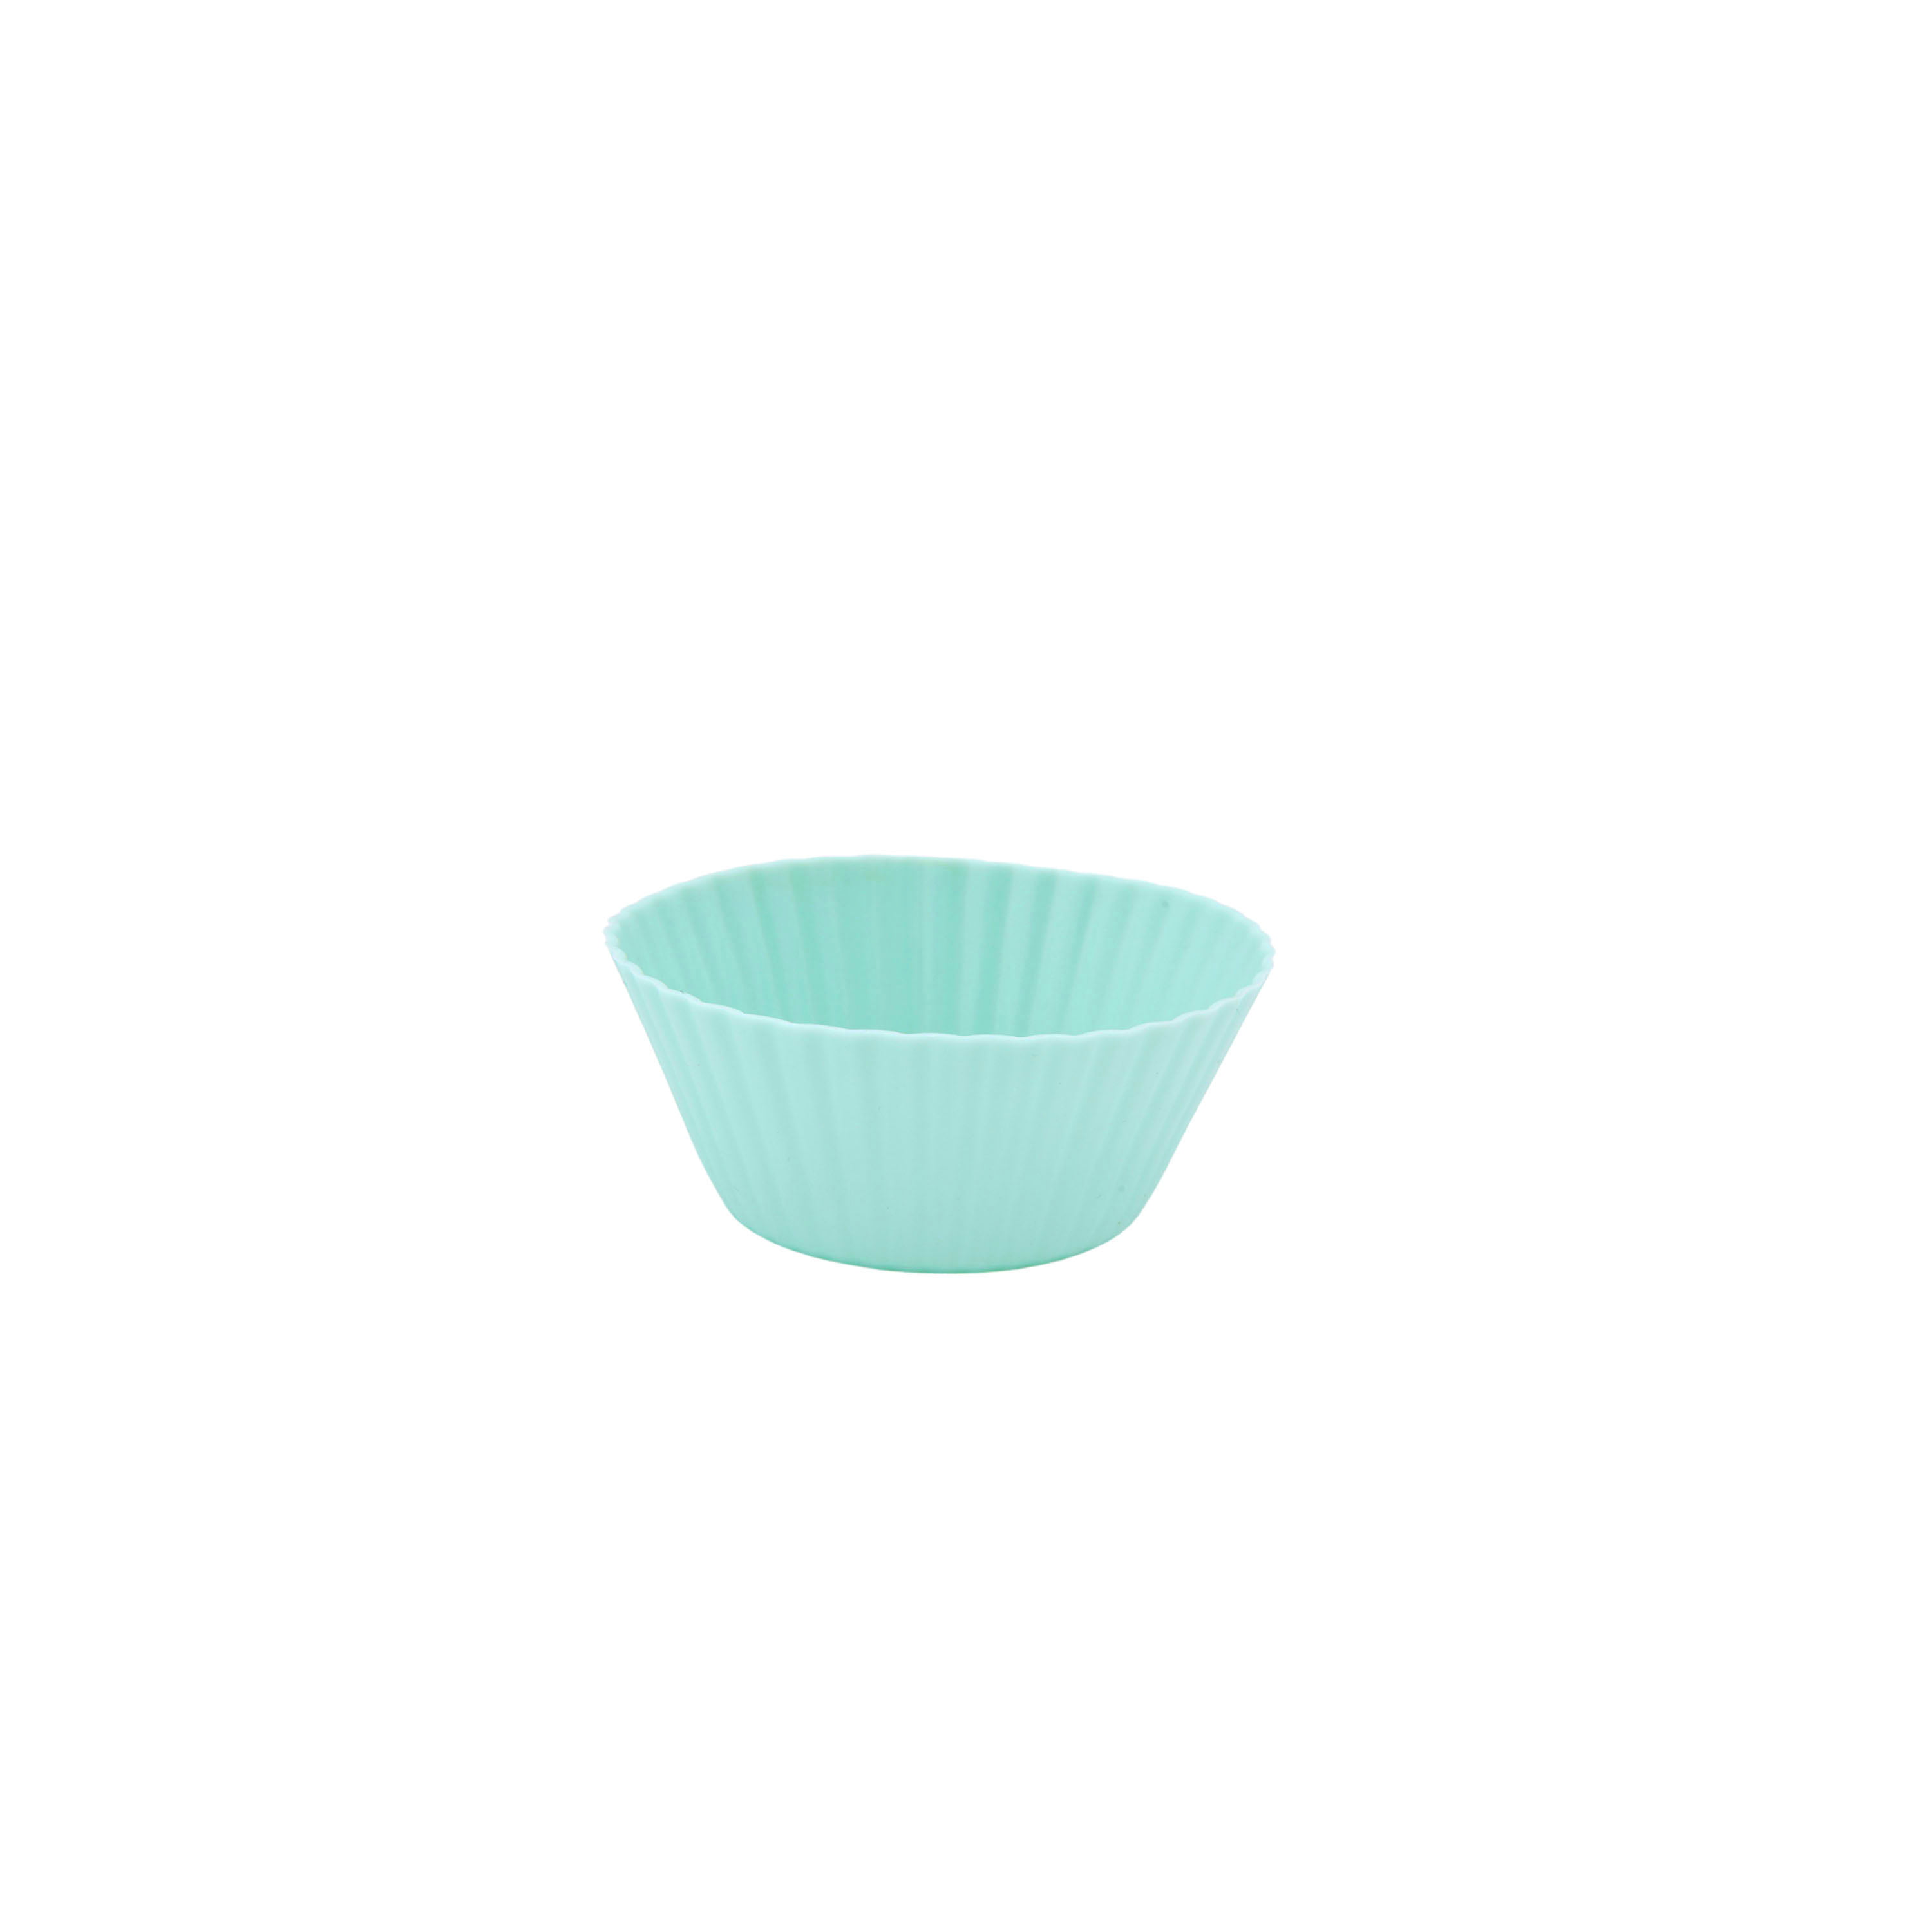 The Pioneer Woman Silicone Kitchen Utensils & Mixing Bowl Set, 14-Pieces,  Teal, Wishful Winter, with Whisk, Spatula, 8 Cupcake Liners 